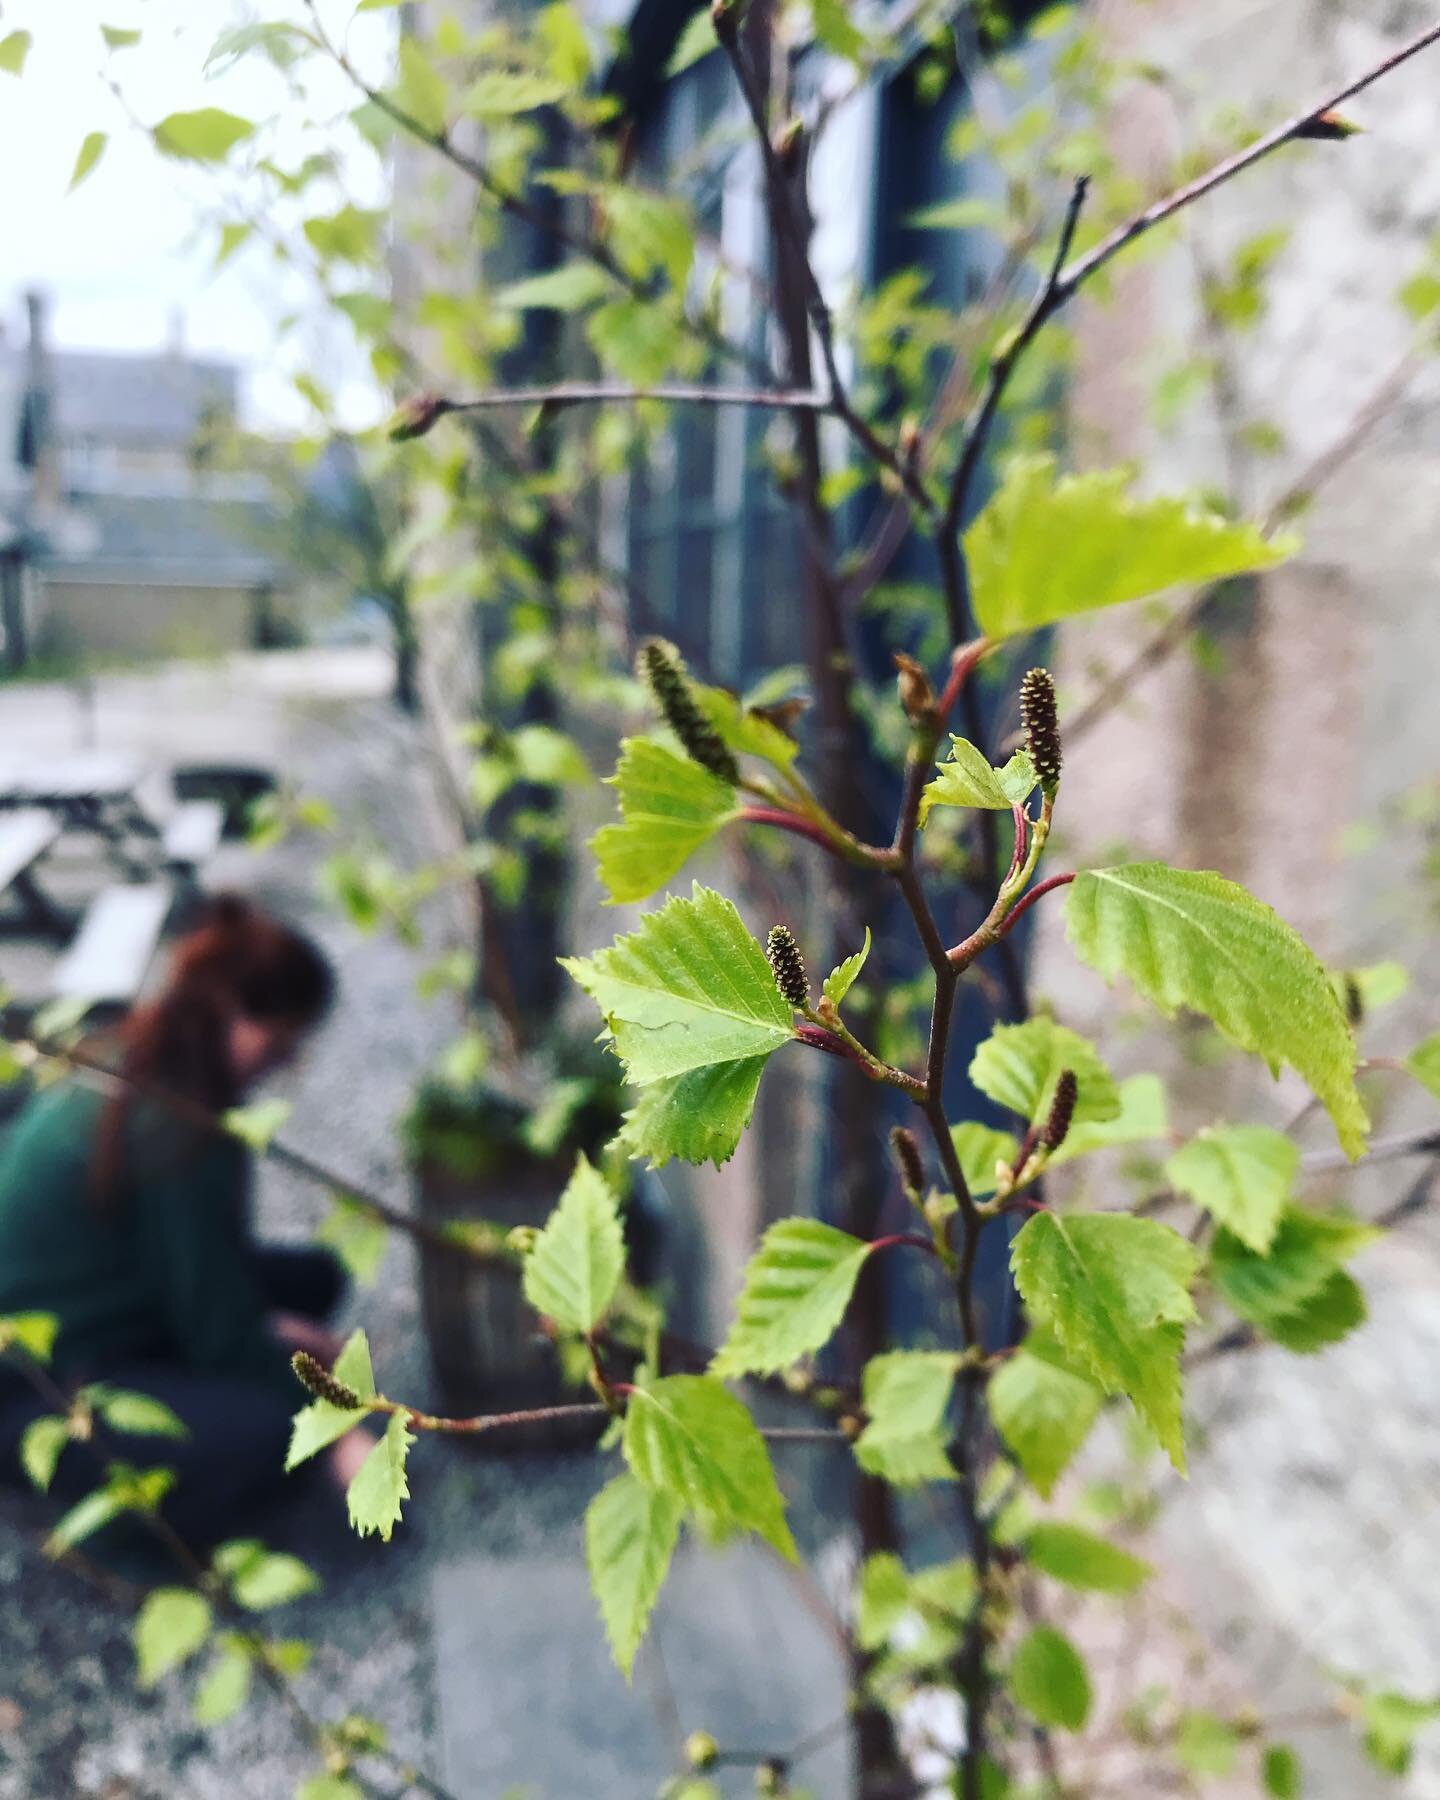 Planting sweet and delicate birch trees .. finally spring is coming! We have leaves! Green is good for the soul. My name Chloe means little green shoot and I think I know why it&rsquo;s my name. Happy Spring everyone! Thank you @botanical.babe for yo